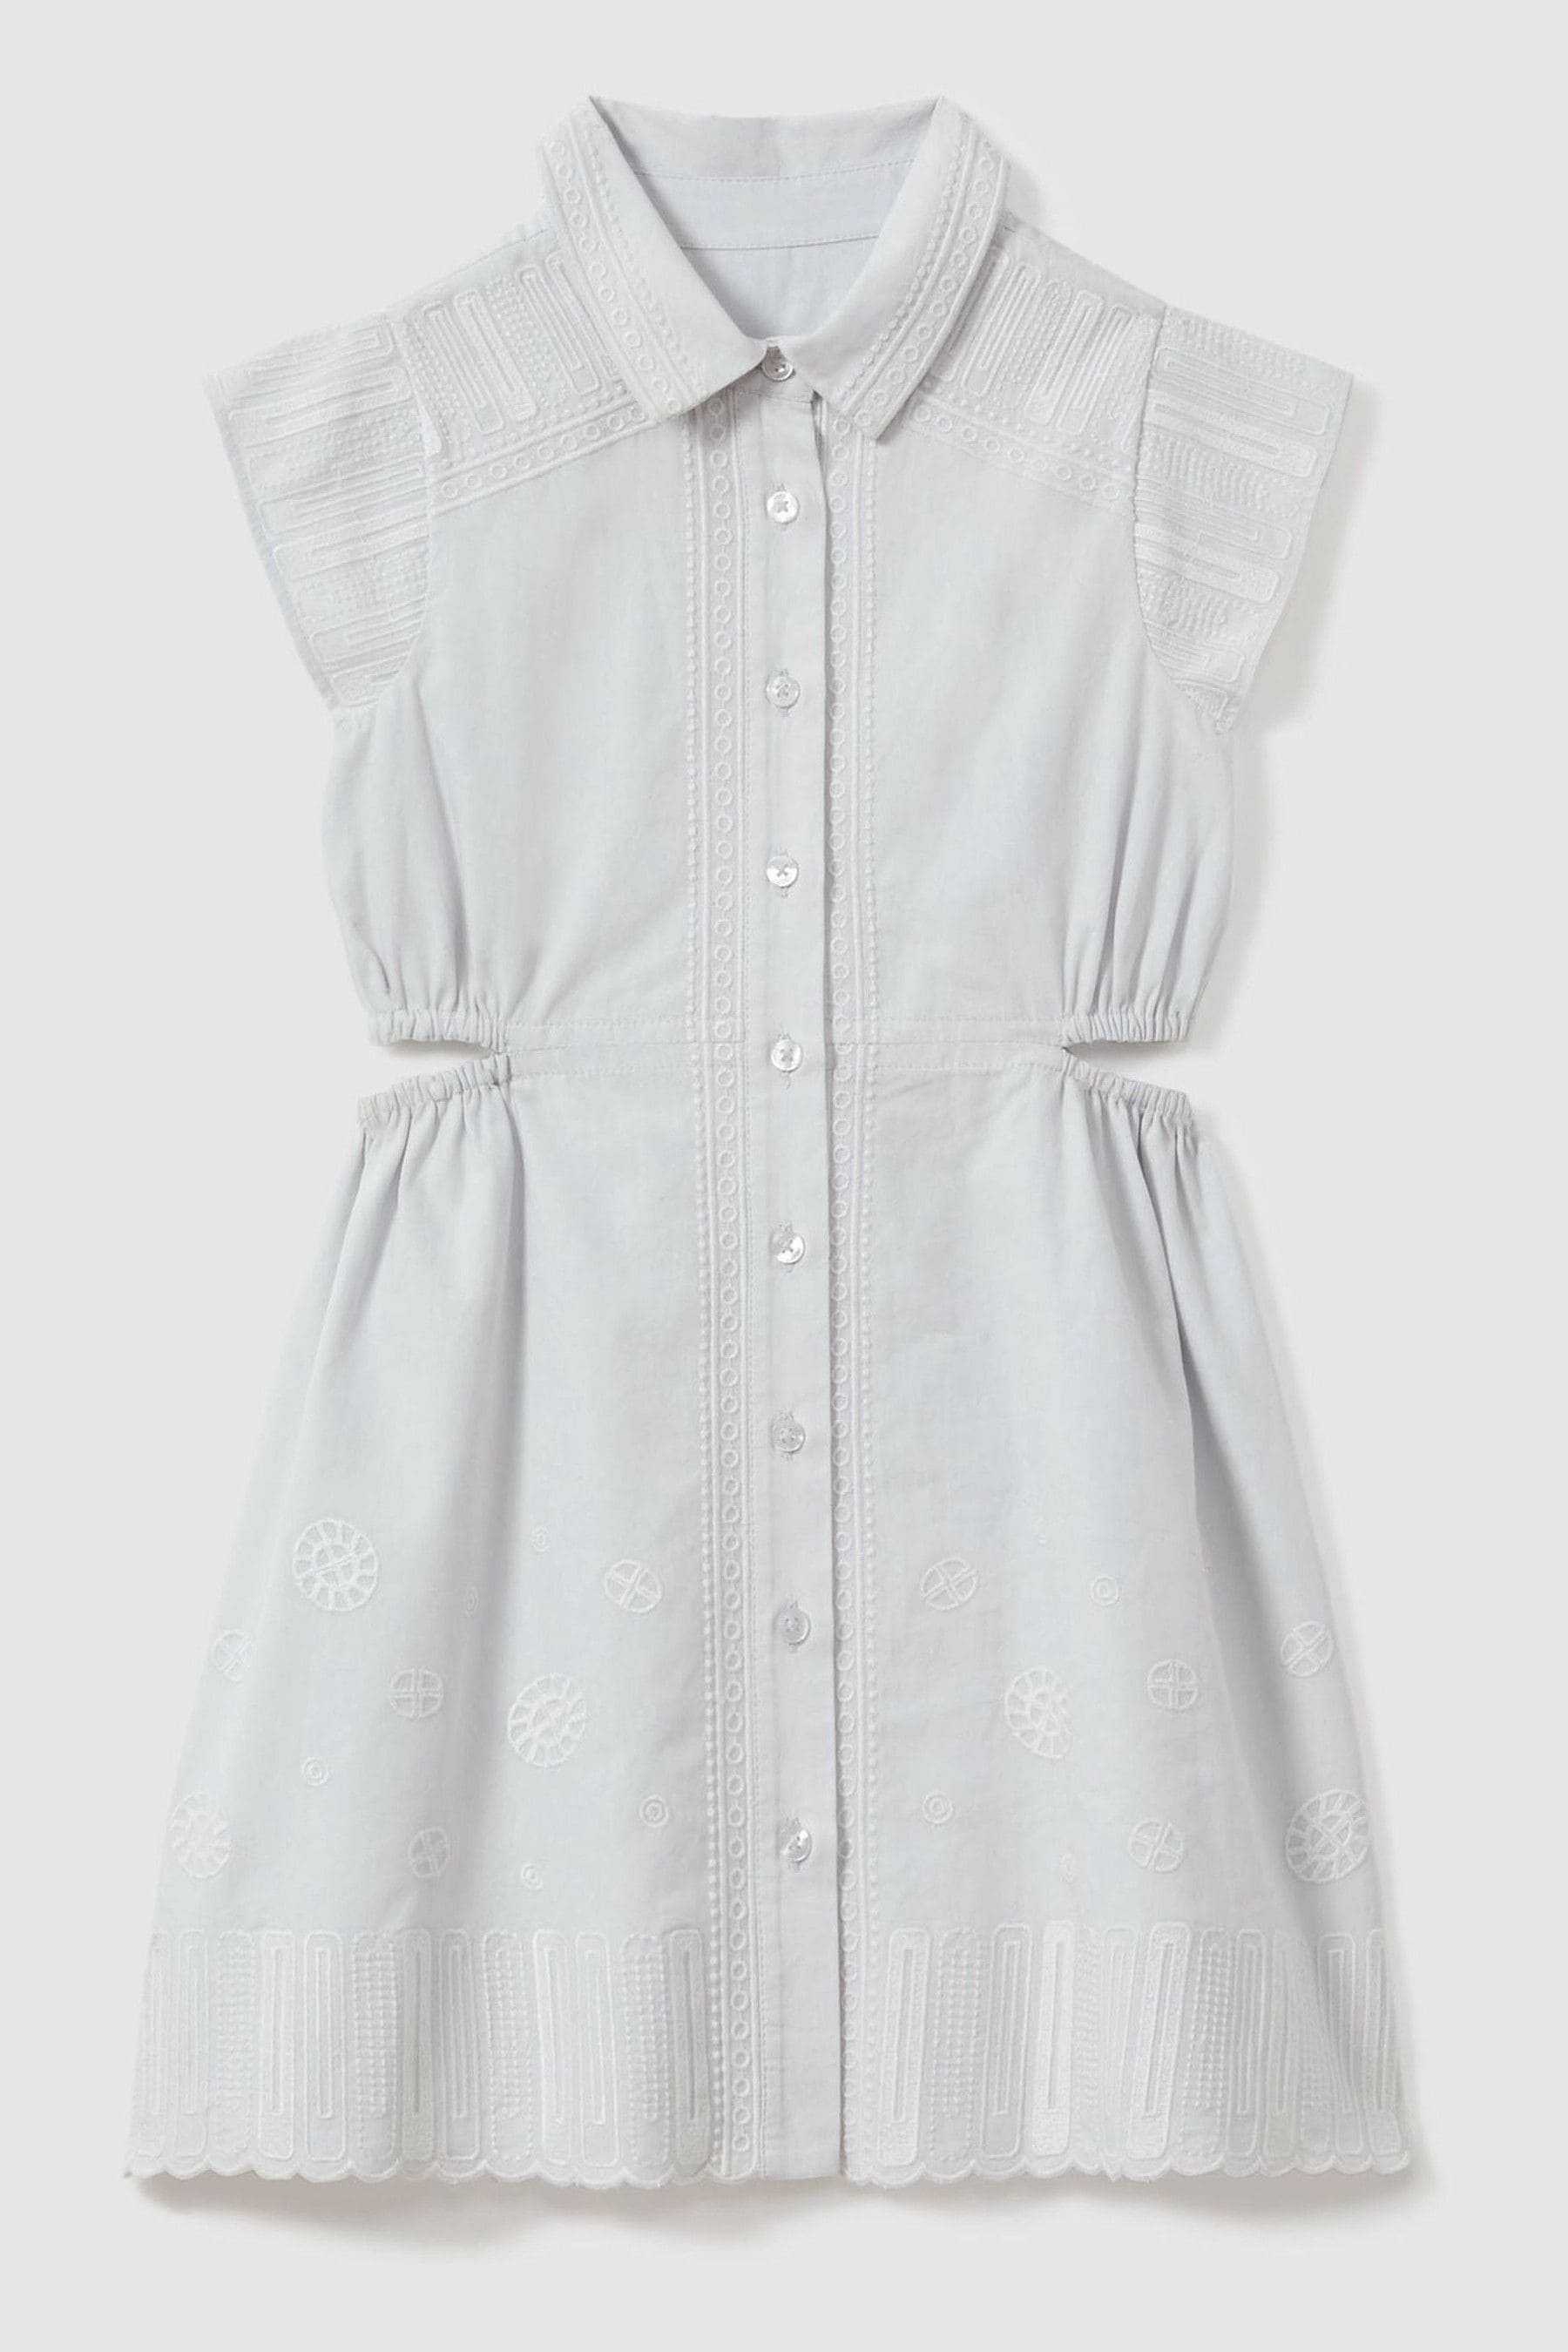 Reiss Elliot - Blue Teen Cotton Embroidered Cut-out Dress, Uk 13-14 Yrs In Gray